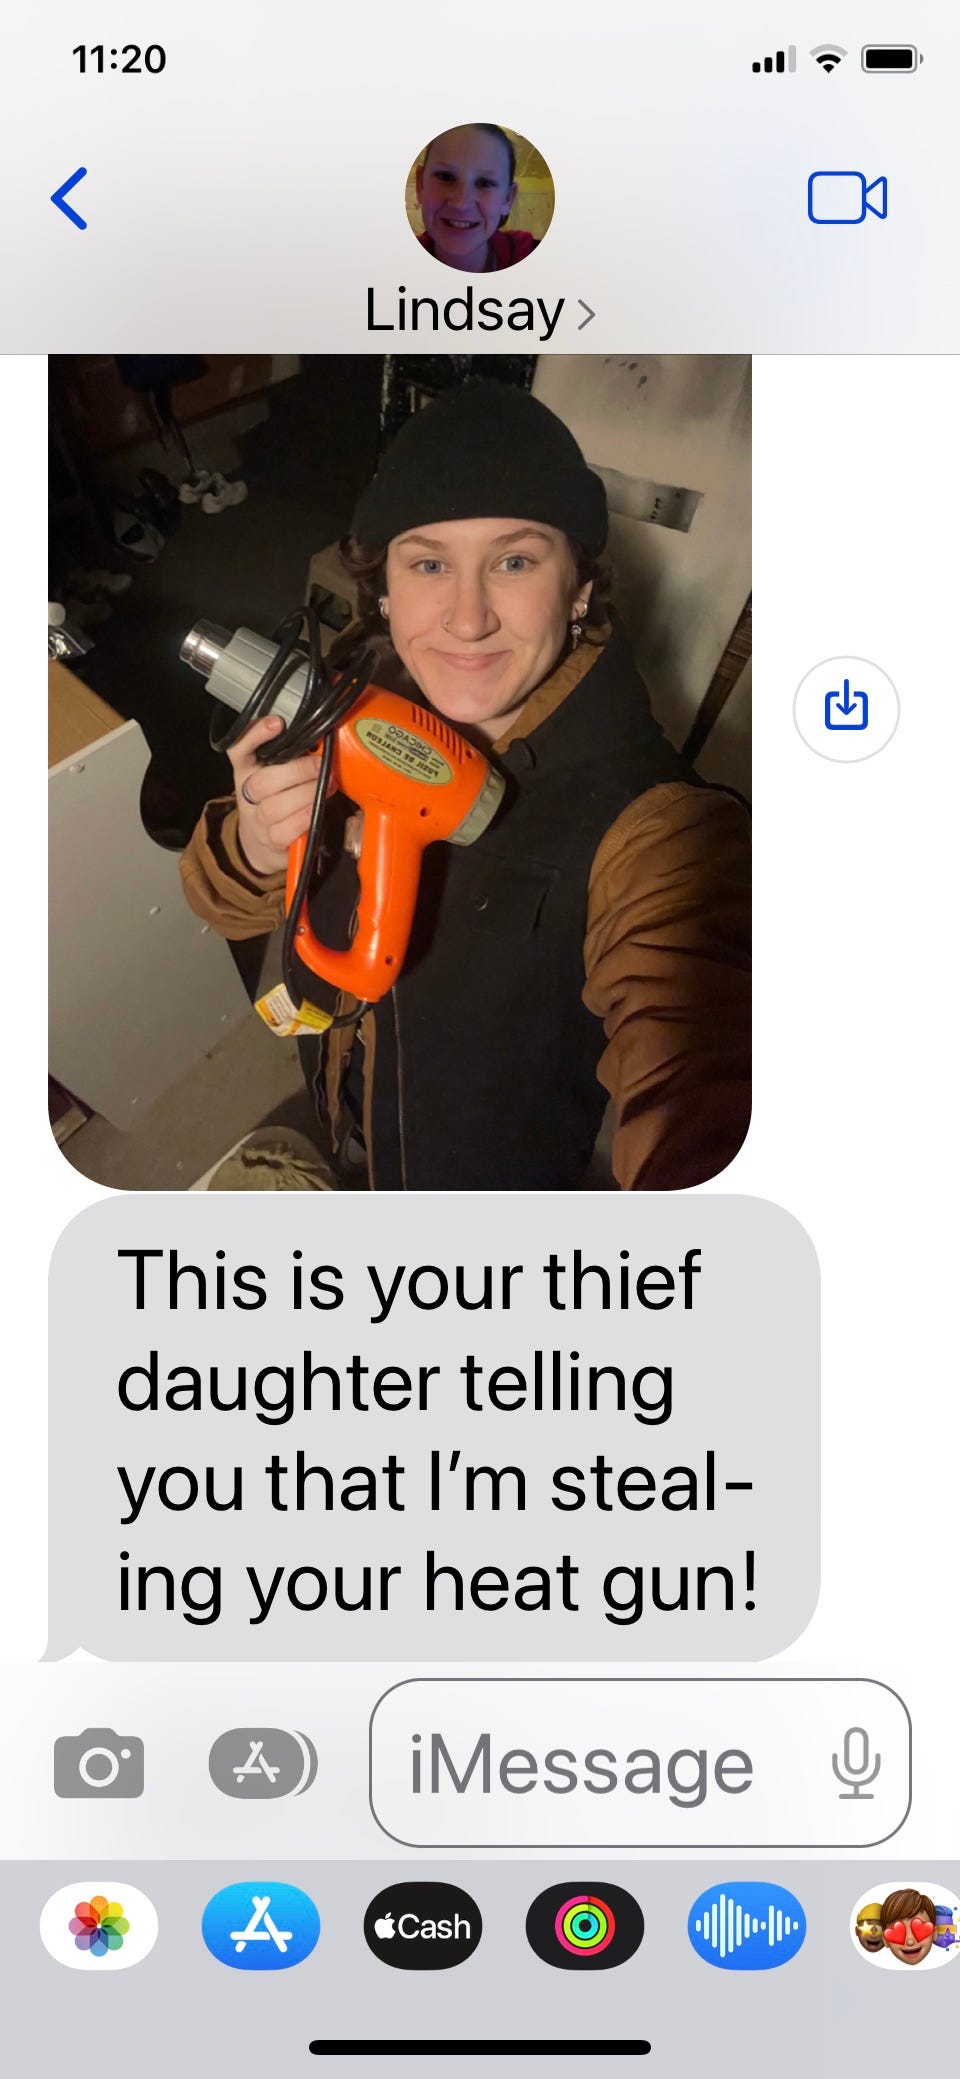 Screenshot of a text message on a phone accompanied by a picture of a young woman holding up a heat gun. The text reads, “This is your thief daughter telling you that I’m stealing your heat gun.”